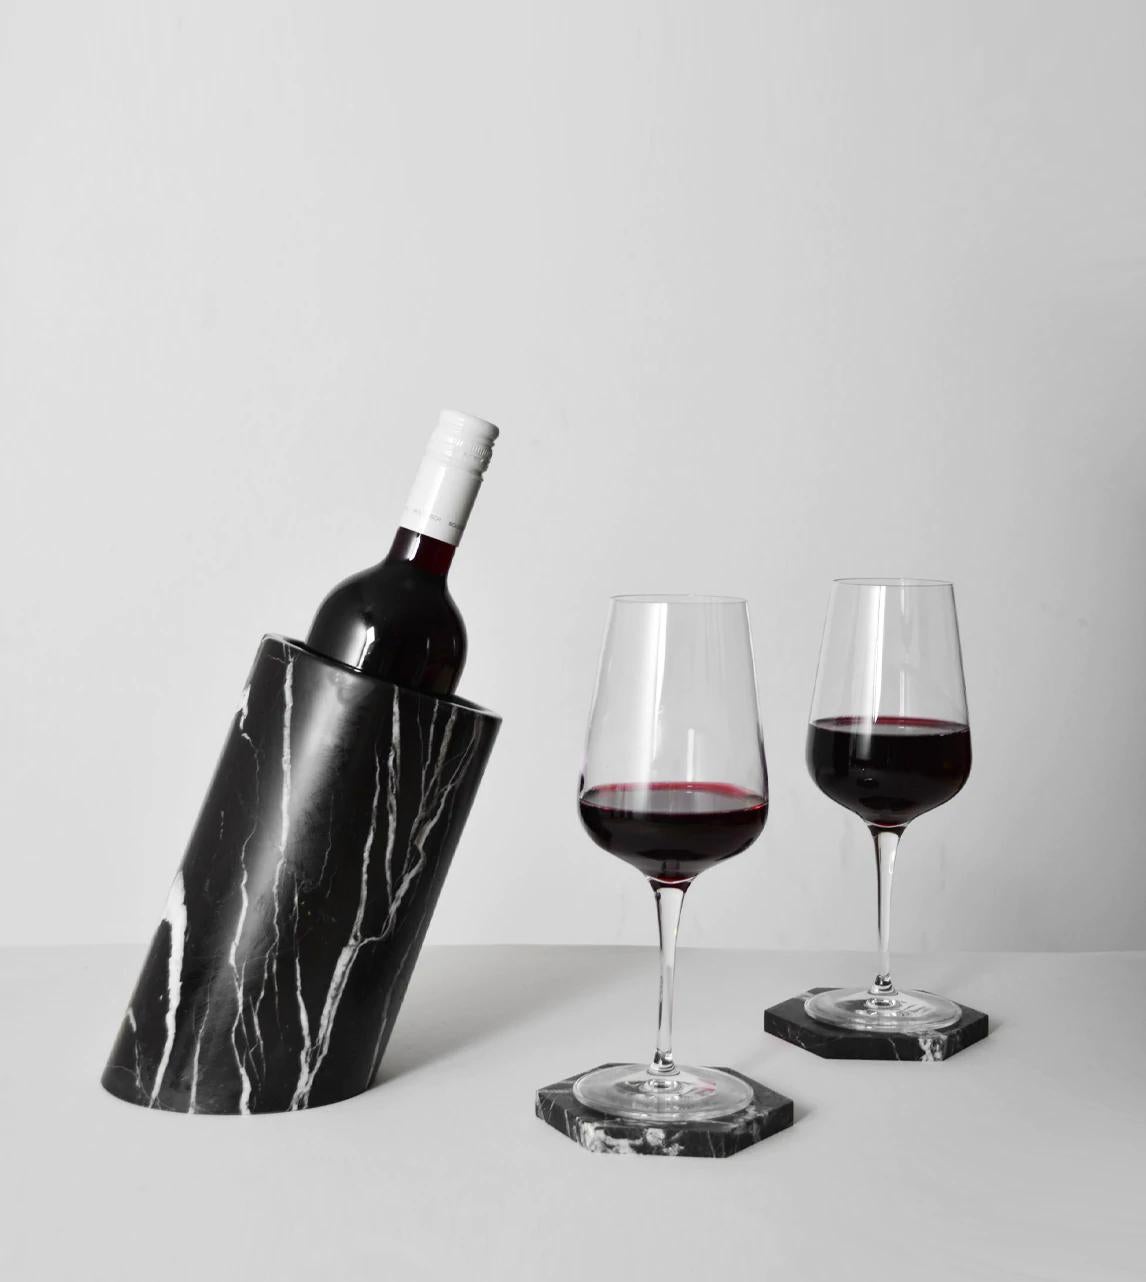 Our wine cooler is designed by us and hand crafted by the artisans within the fair-trade principles.

The natural properties of the marble will keep your wine chilled with no need for ice - you can also place this marble cooler in the fridge for